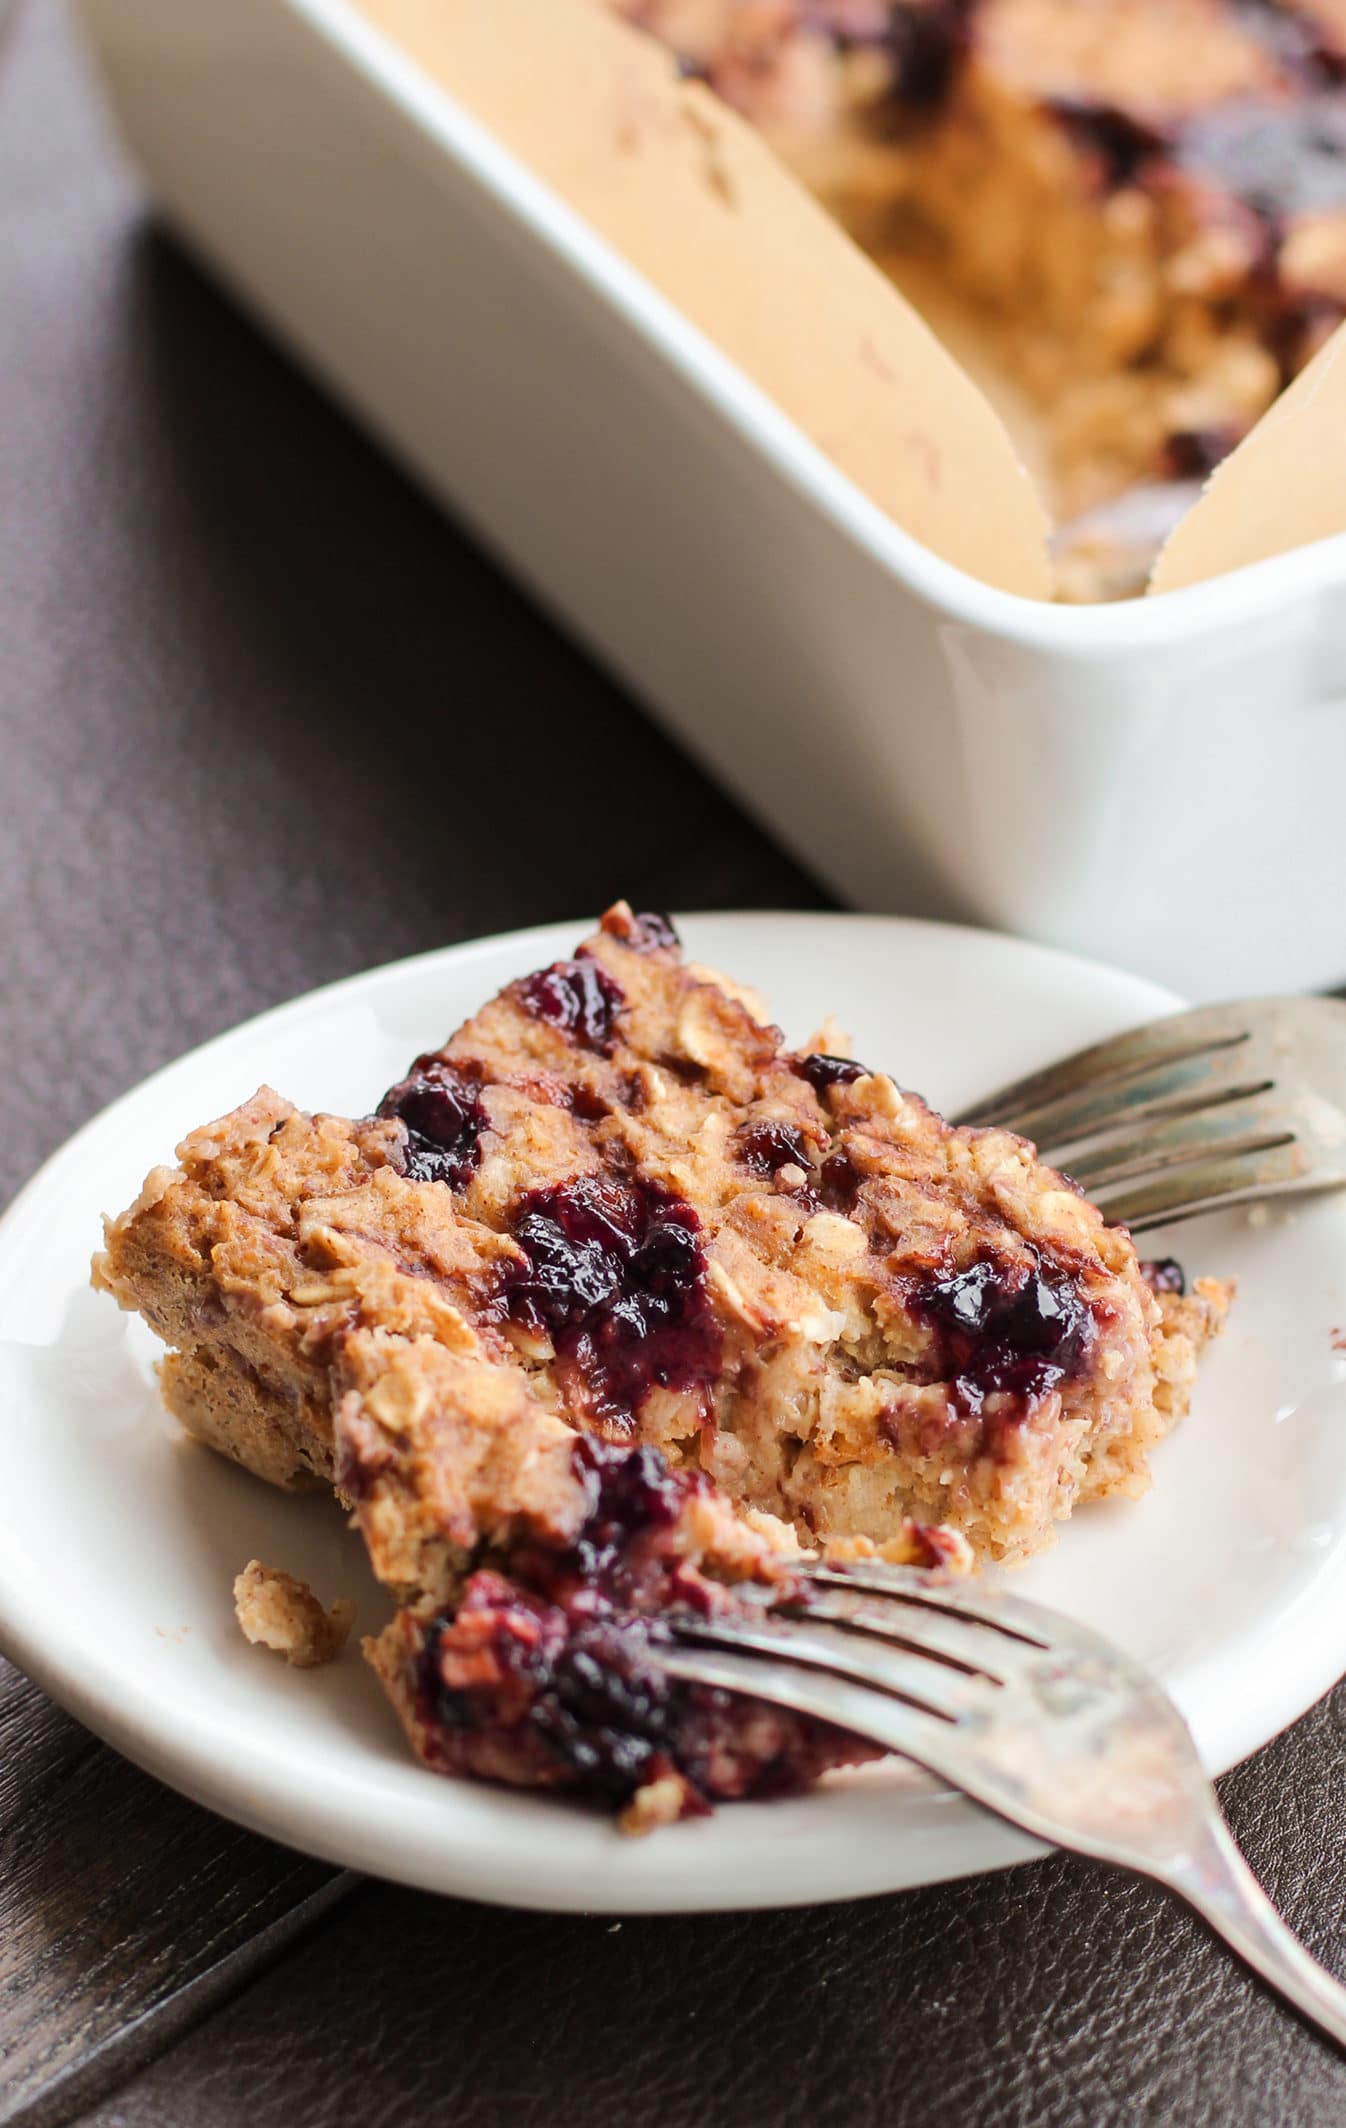 Healthy Peanut Butter and Jelly Baked Oatmeal (refined sugar free, high protein, high fiber, gluten free, vegan) - Healthy Dessert Recipes at Desserts with Benefits